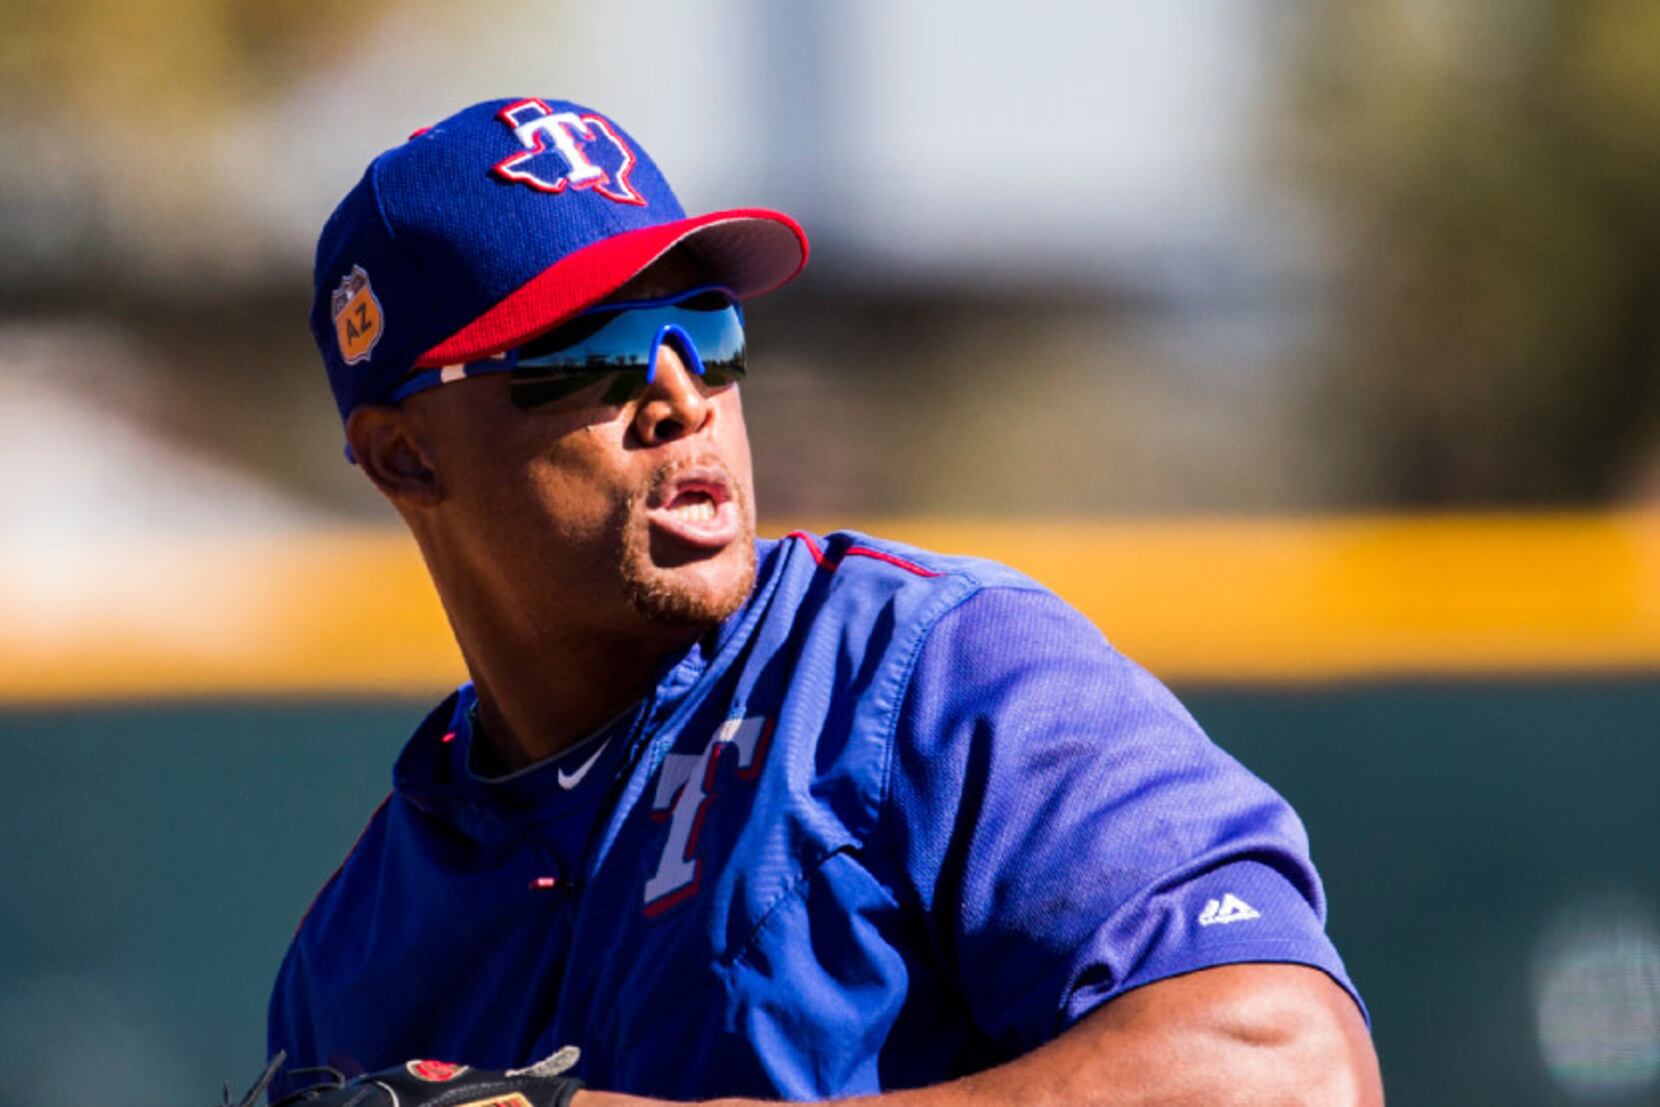 Adrian Beltre: Quiet Hall Of Fame Candidate - SB Nation Dallas